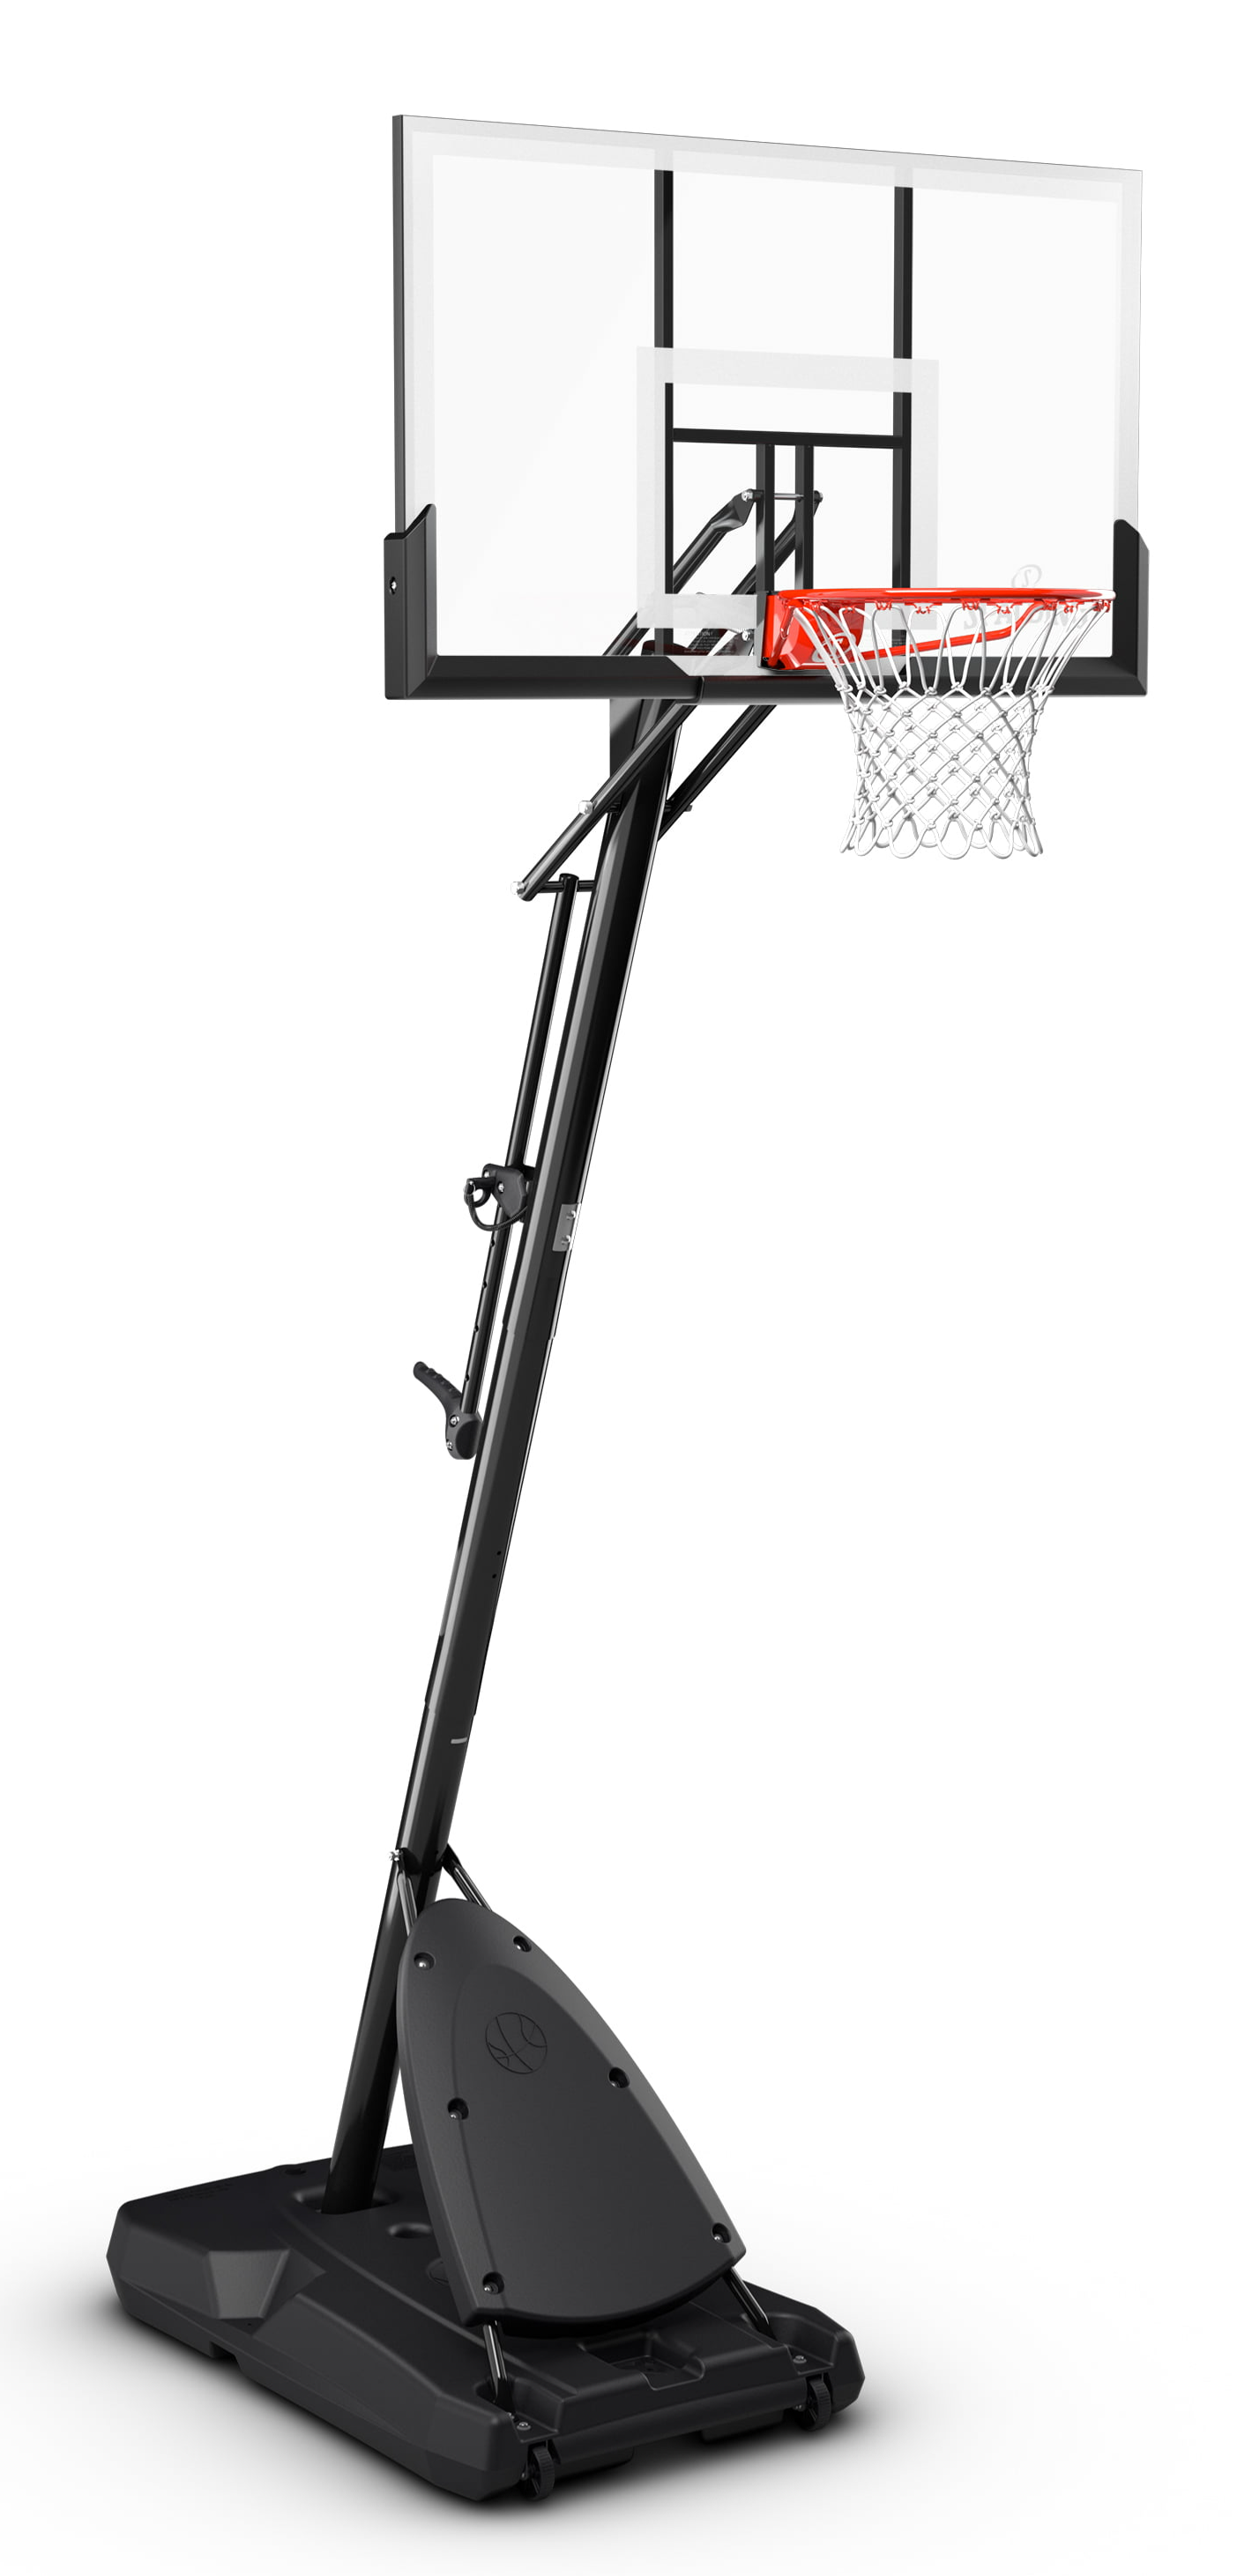 Spalding 54 In. Shatter-proof Polycarbonate Exacta height Portable Basketball Hoop System $130, YMMV at Walmart B&M